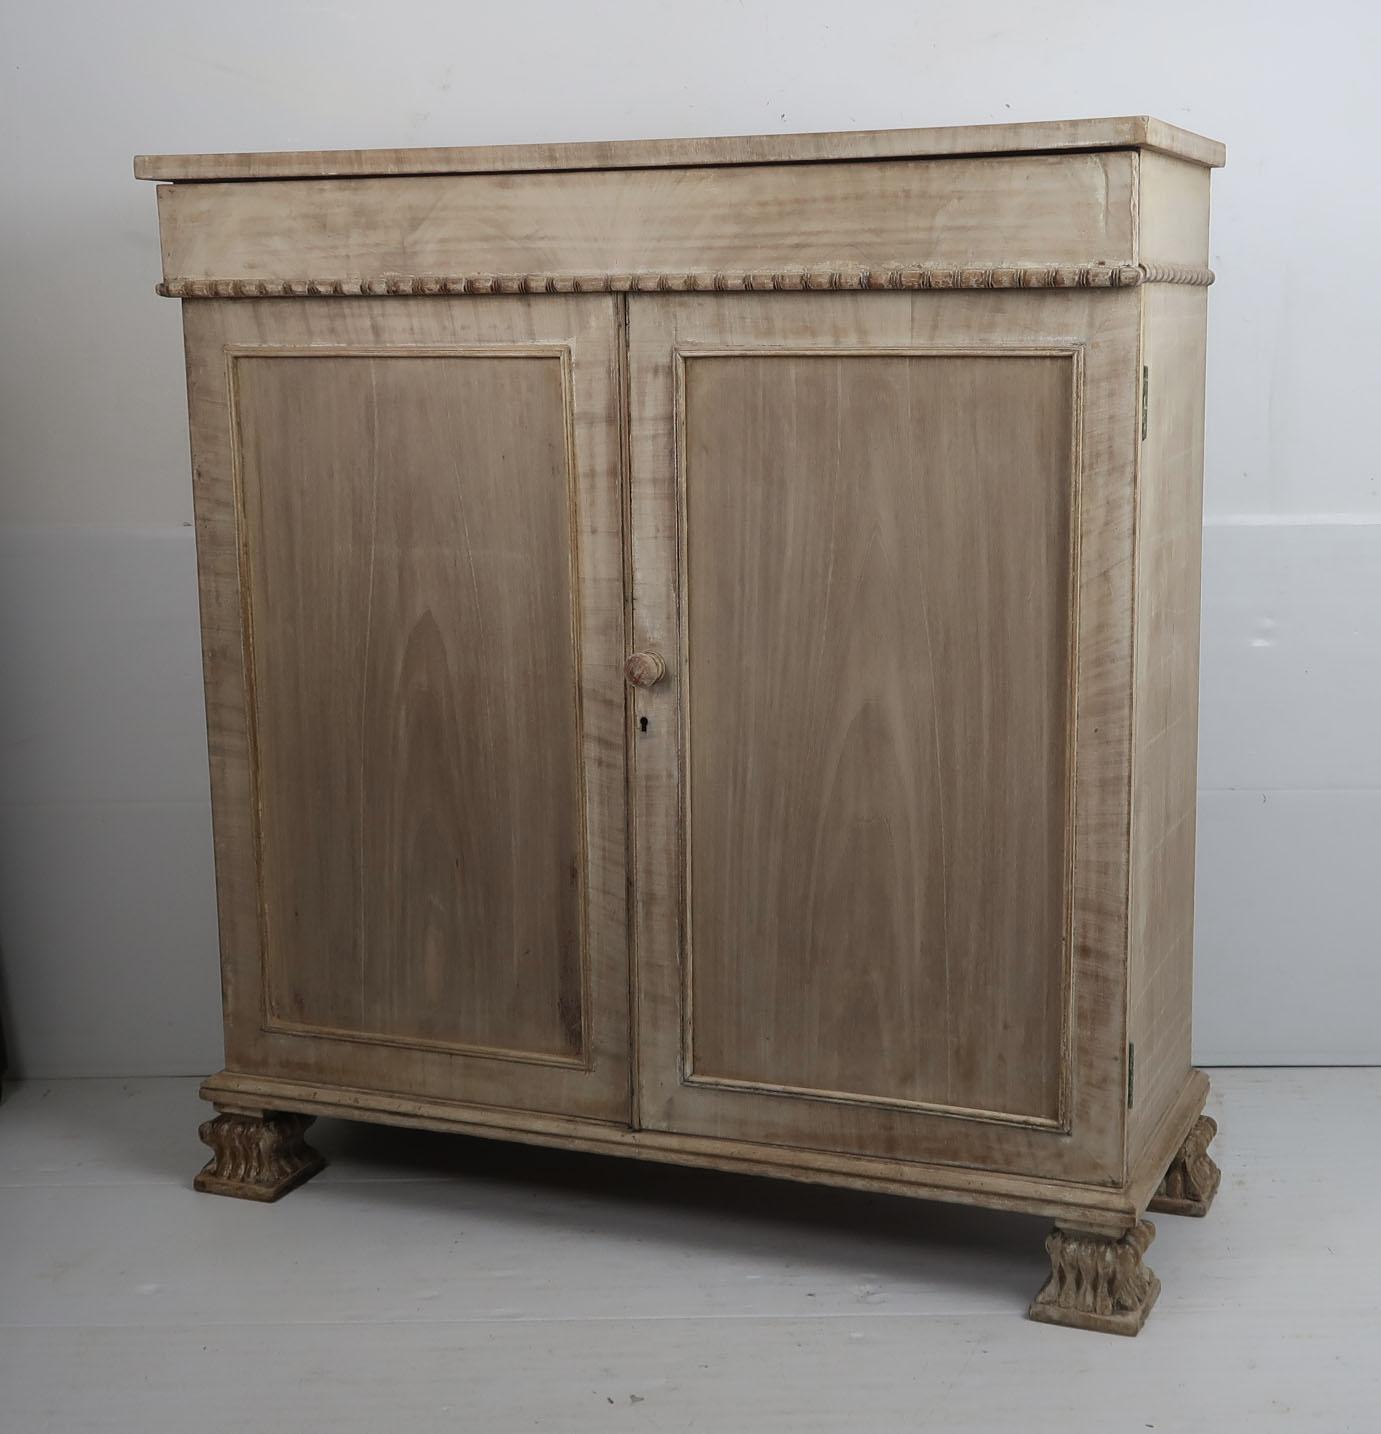 Fabulous small bleached mahogany side cabinet, buffet or server

In Palladian or neoclassical style

I particularly like the beaded detail on the bottom edge of the drawer and the amazing feet

Beautifully figured mahogany particularly on the